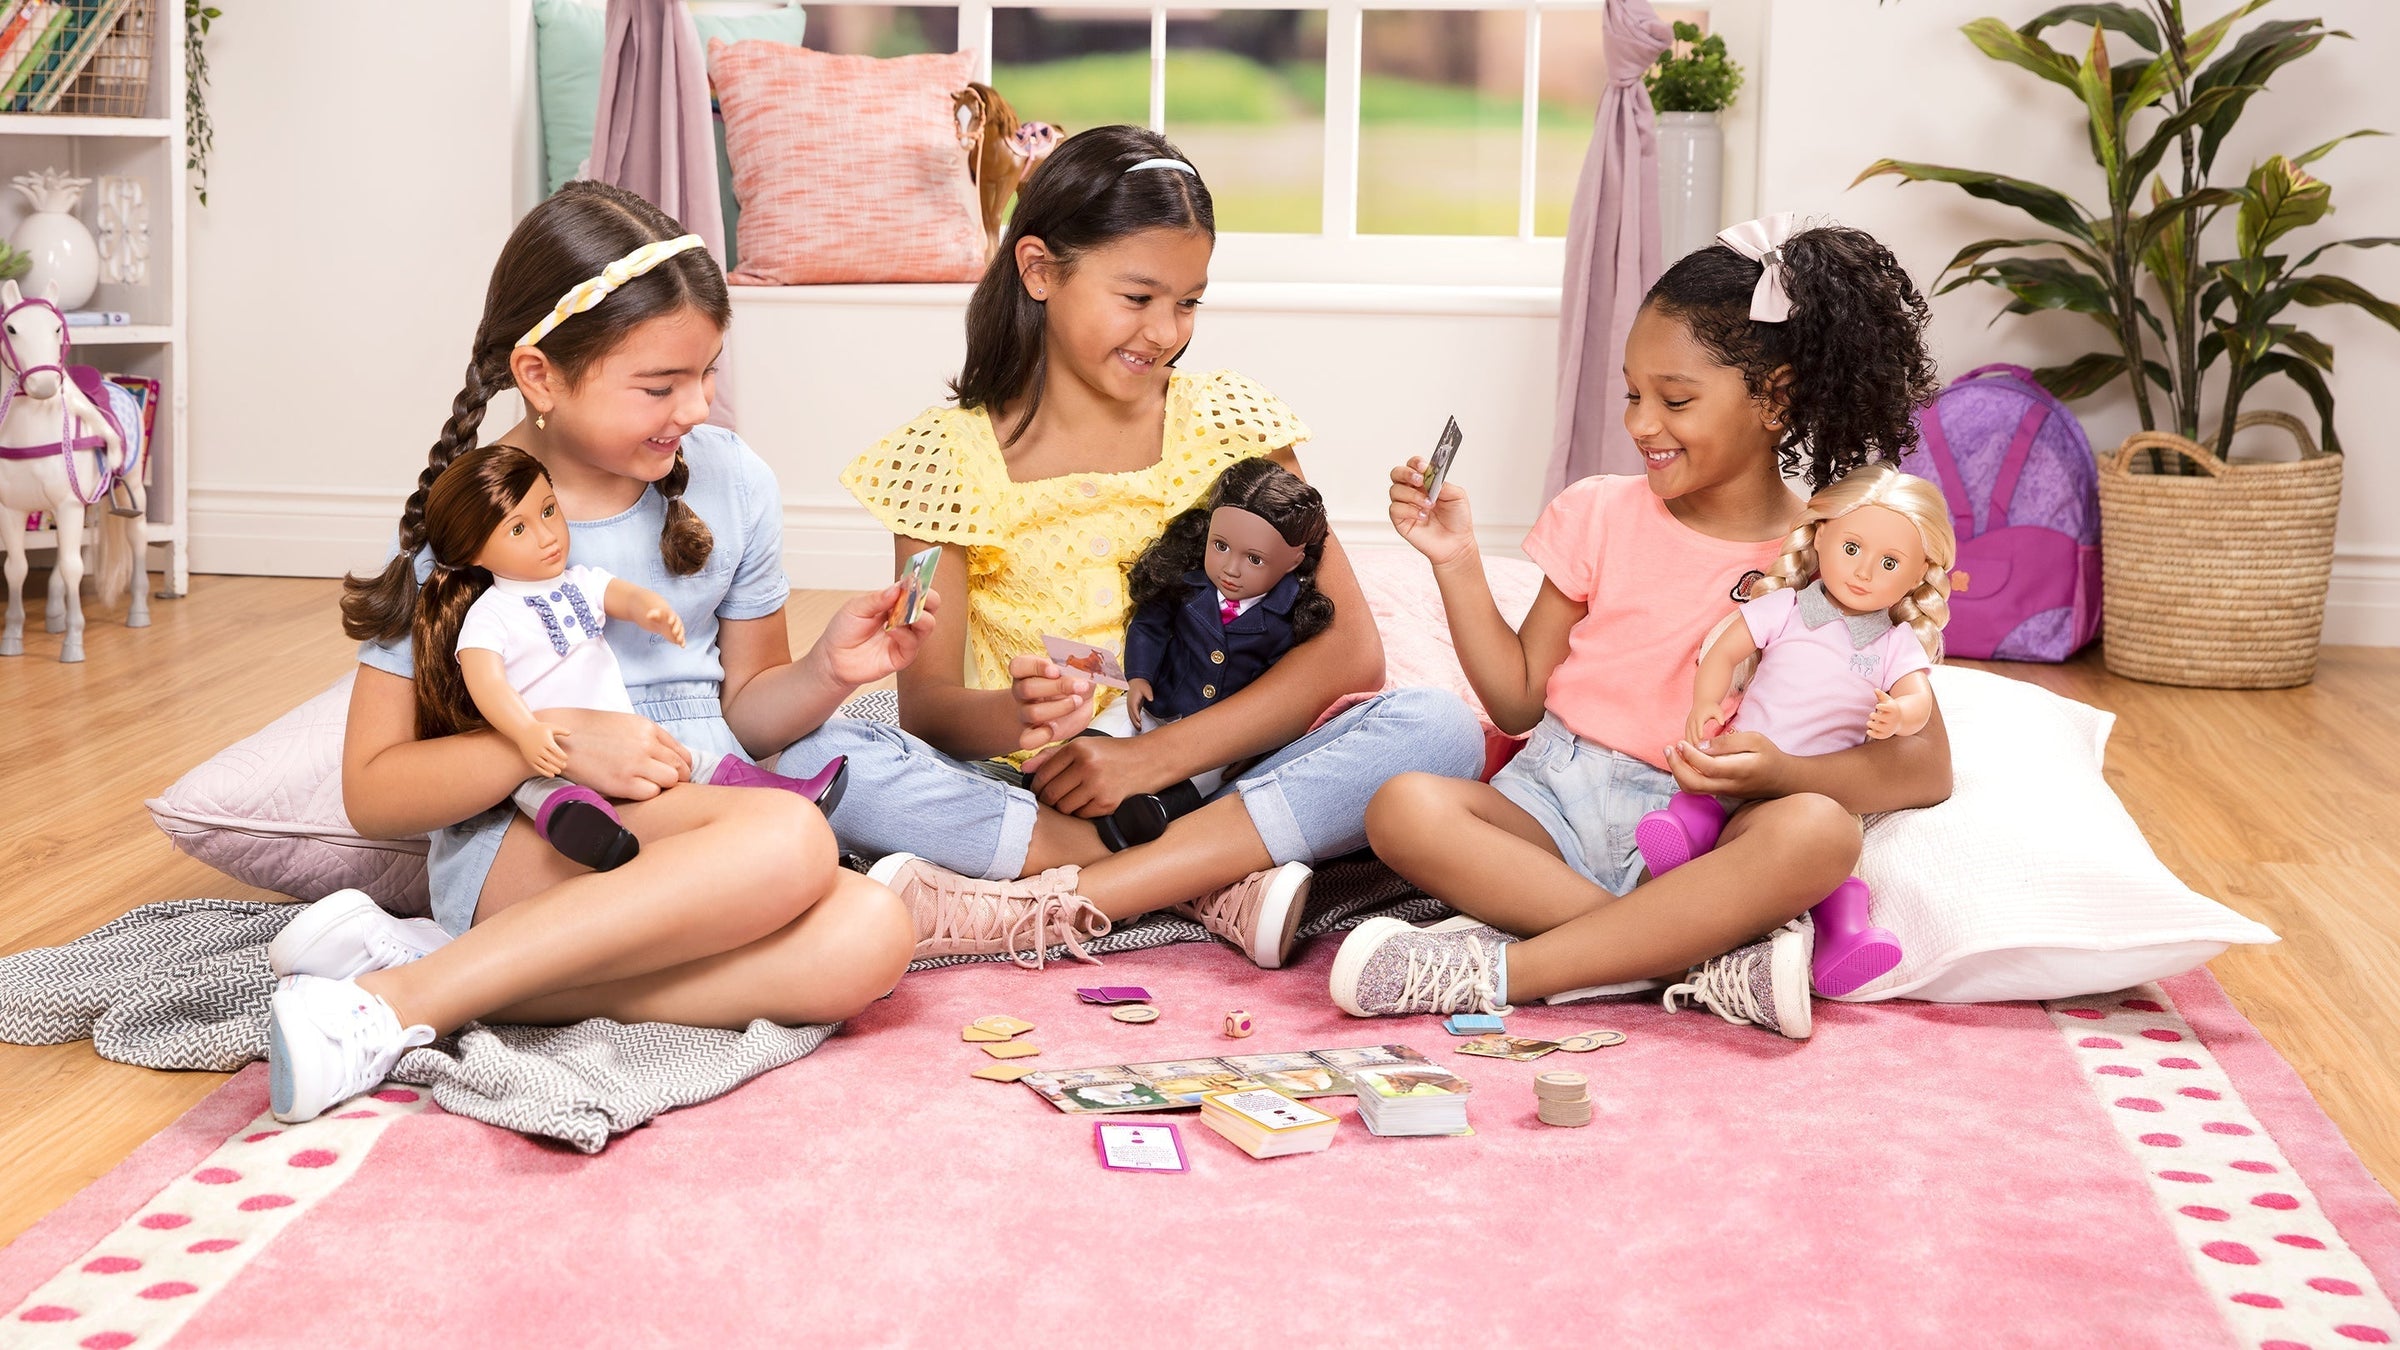 A diverse group of young Girls are playing with dolls